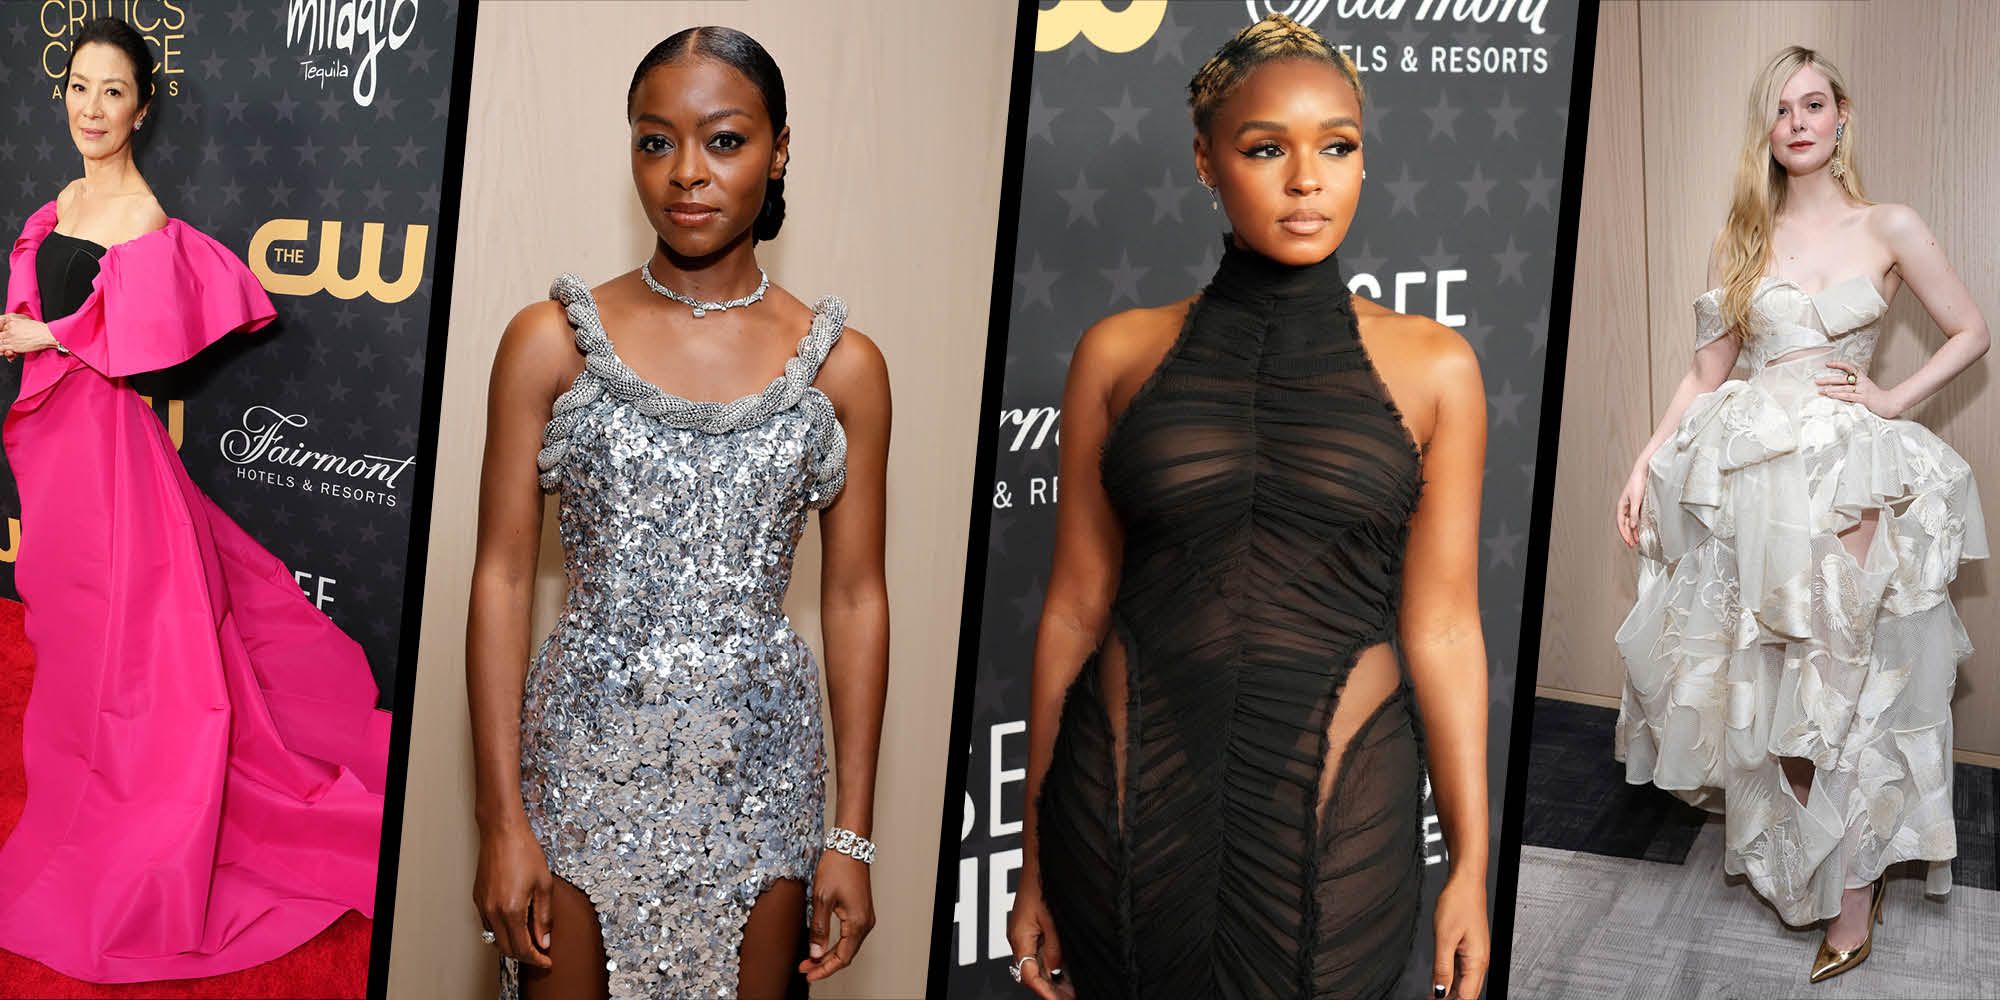 Sheer Dresses Were All the Rage at the Critics' Choice Awards